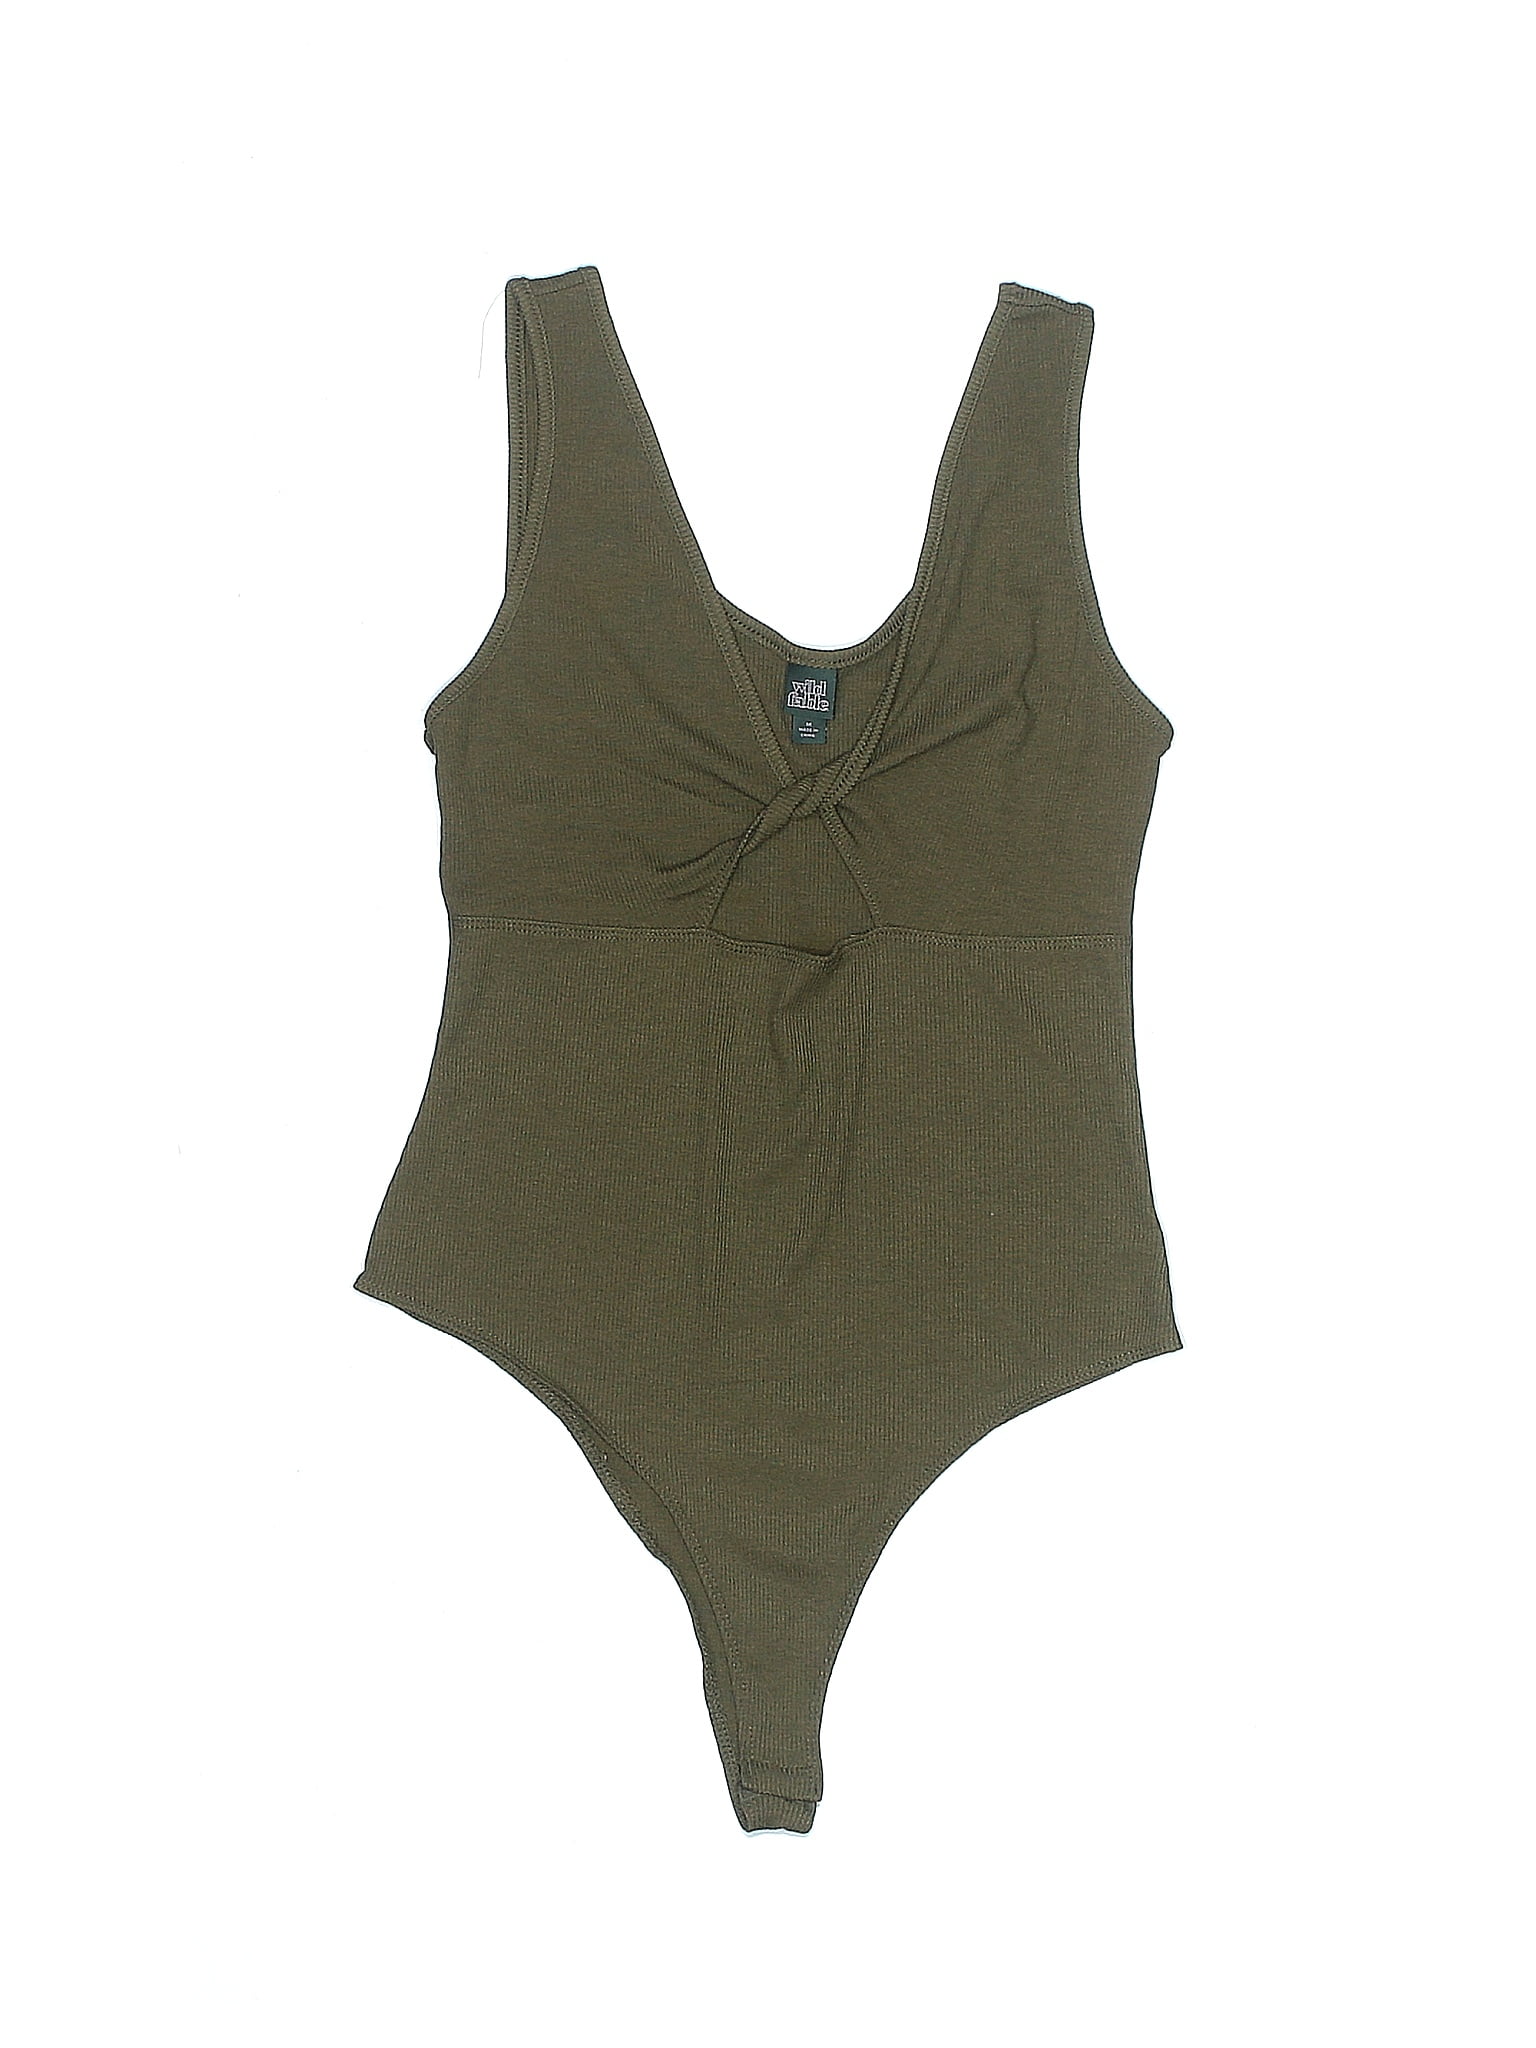 Wild Fable Solid Green Bodysuit Size M - 37% off